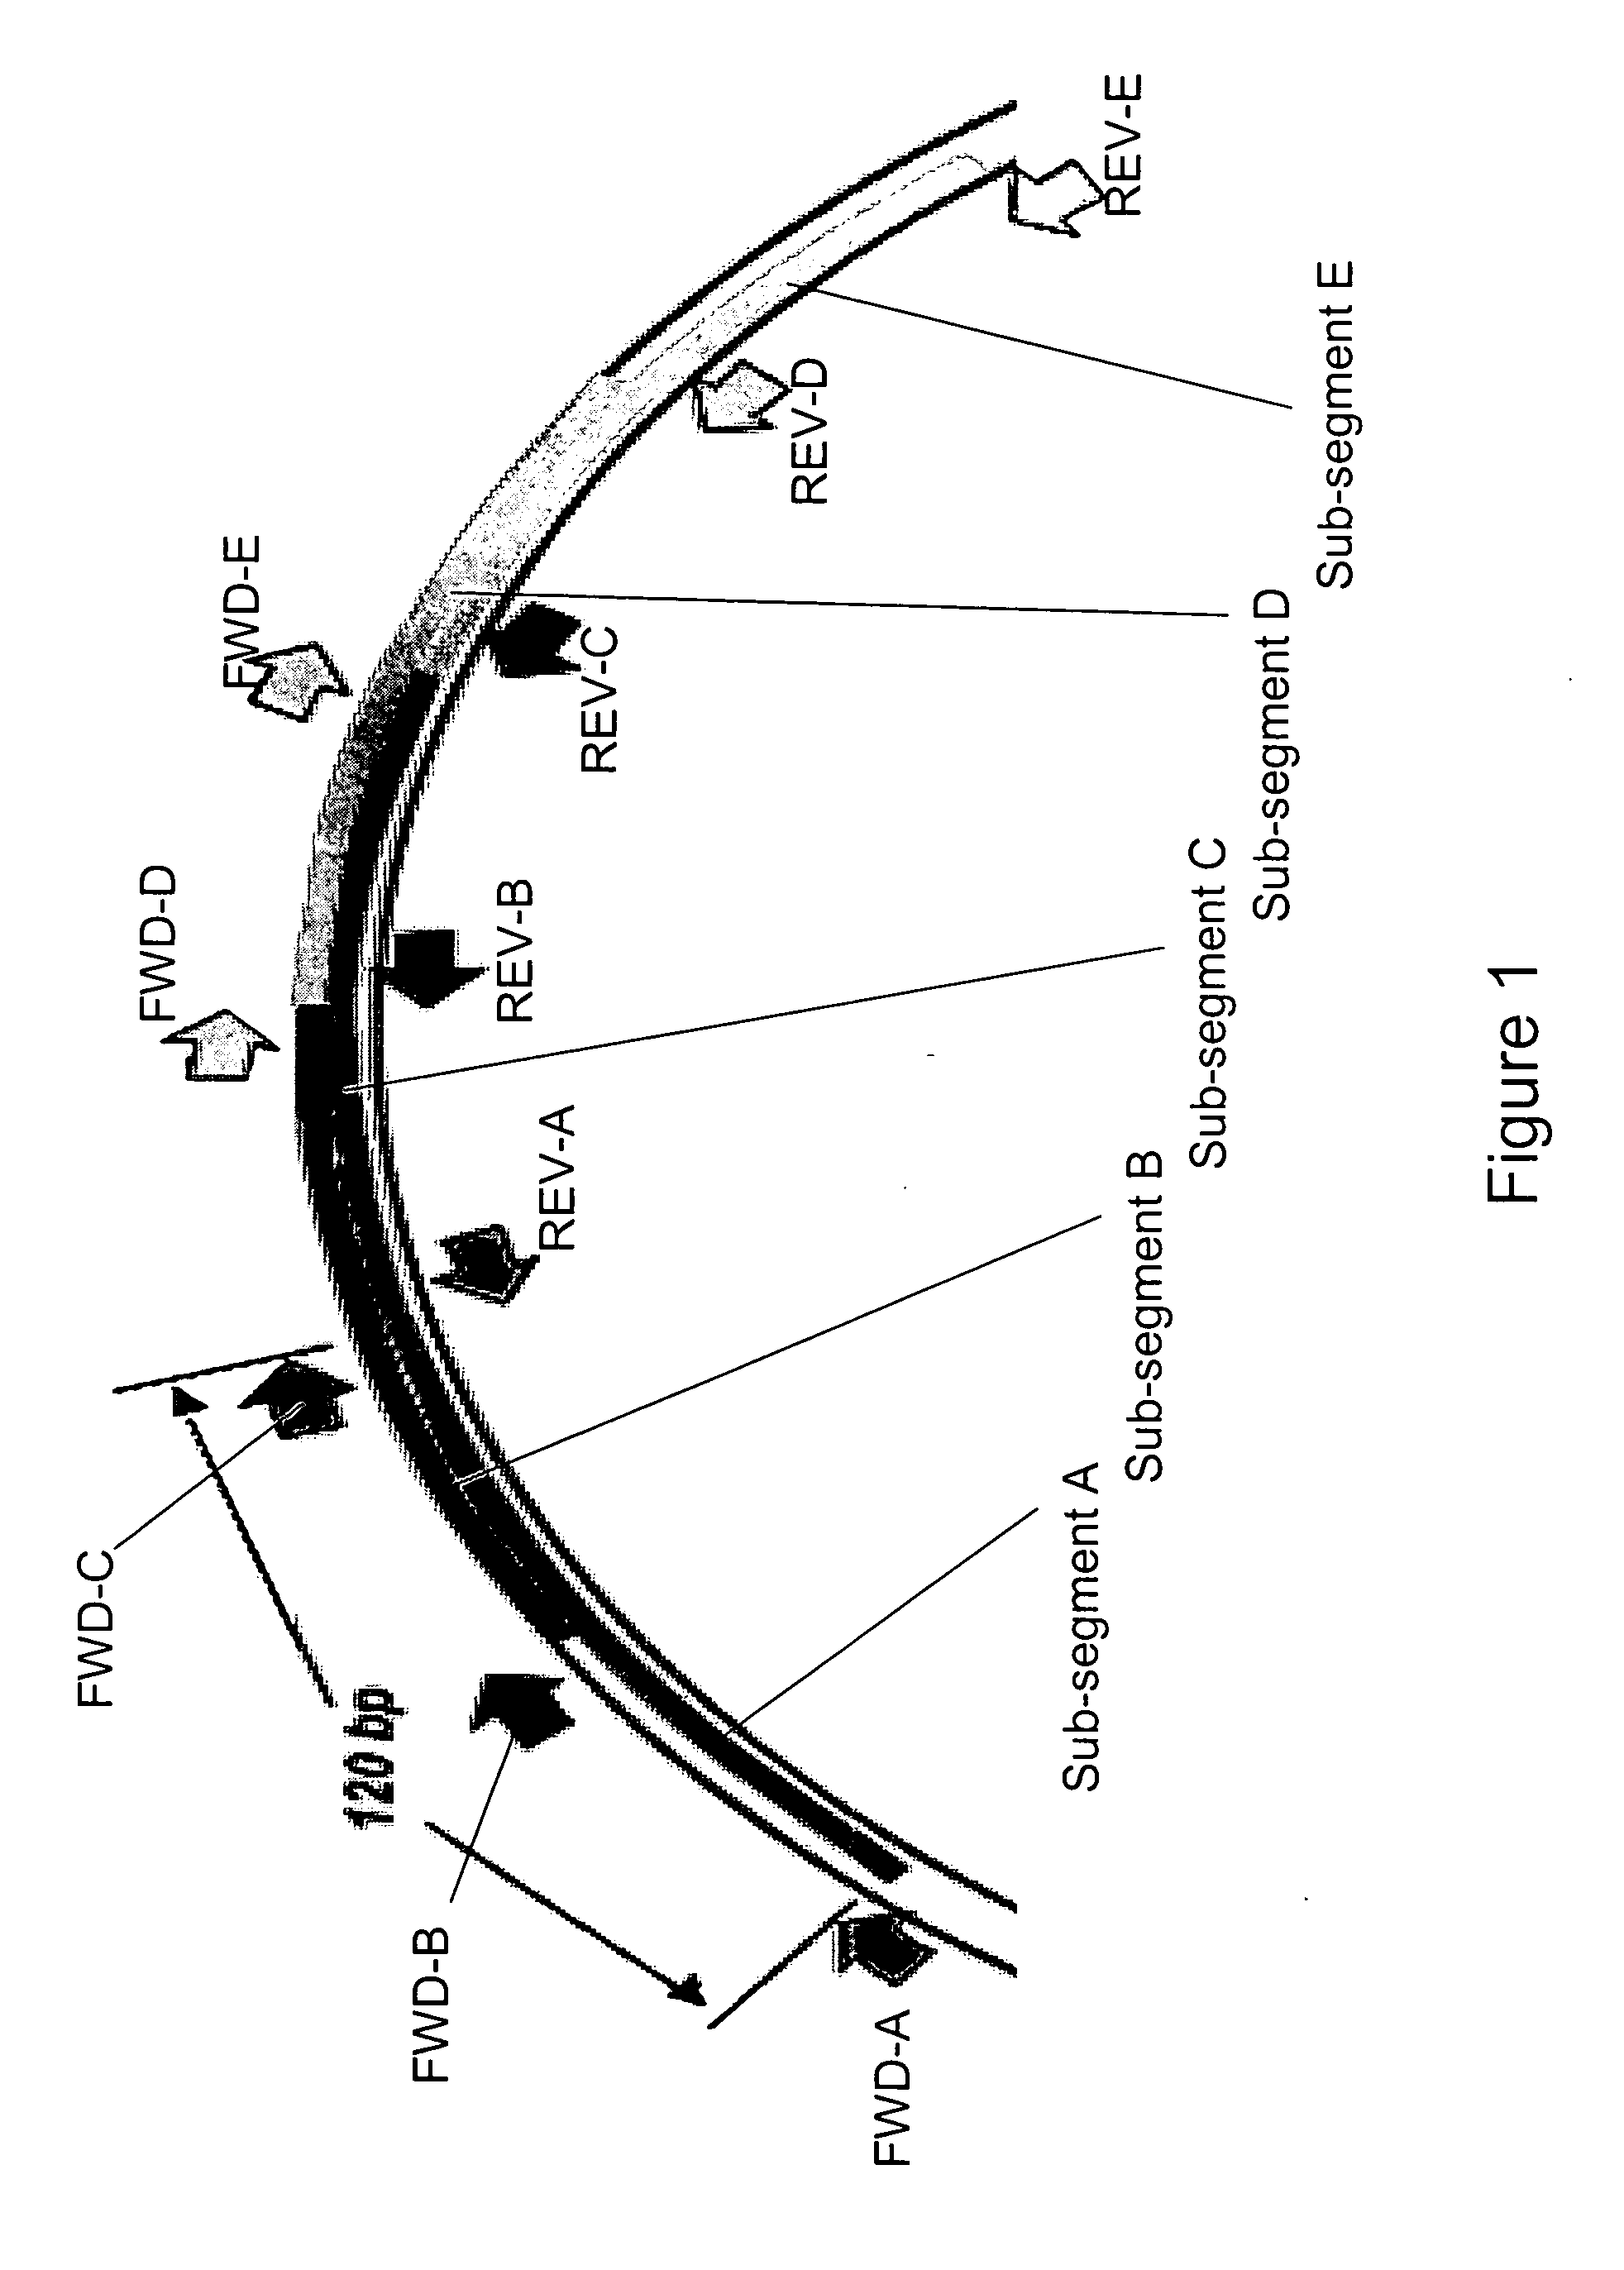 Methods for rapid identification and quantitation of nucleic acid variants